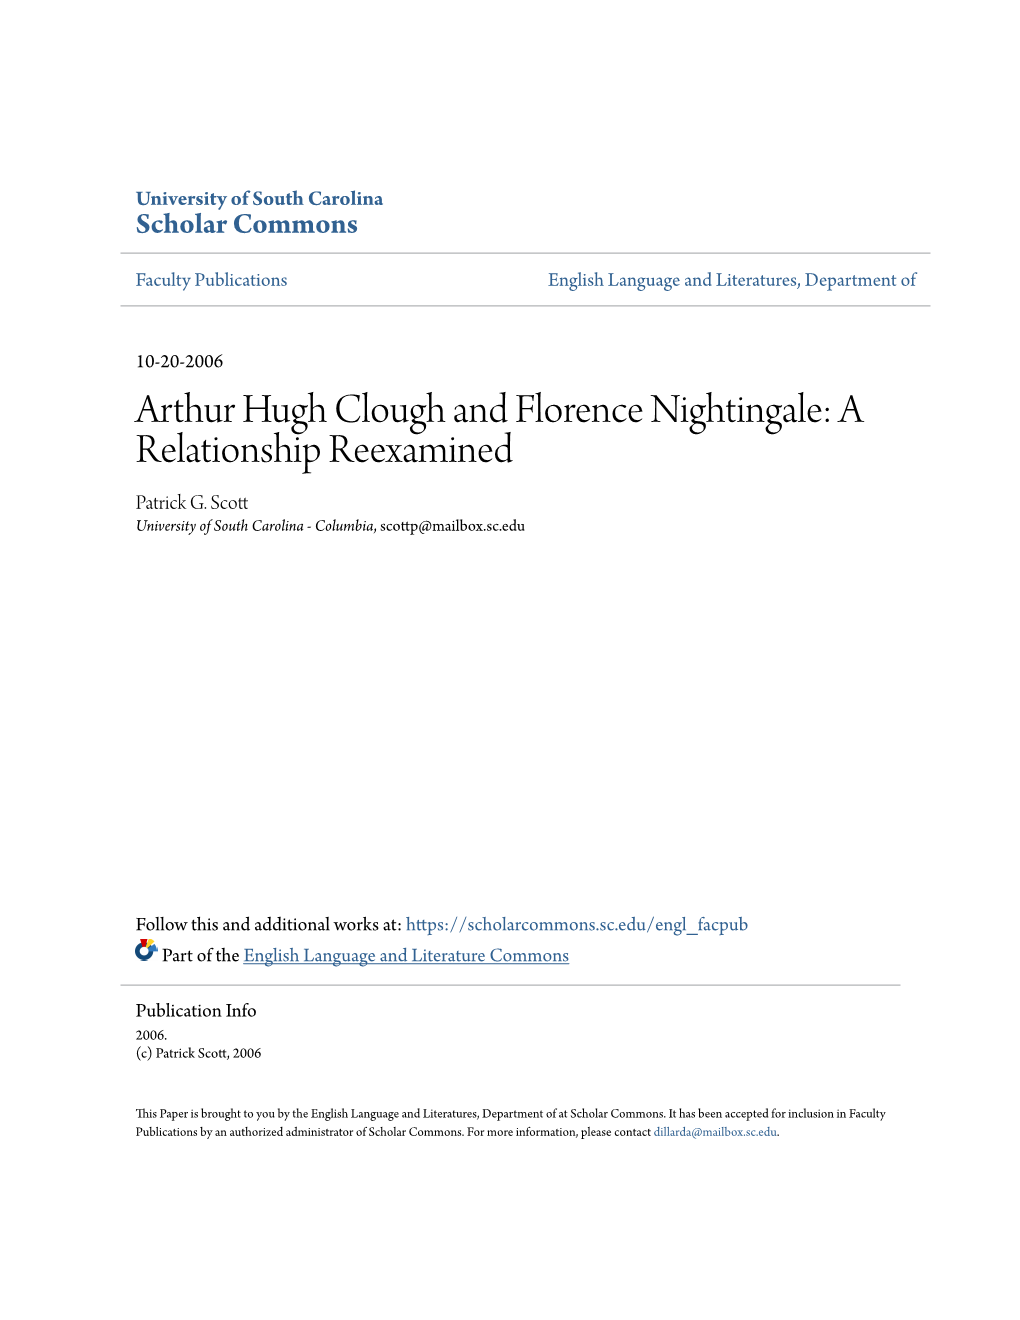 Arthur Hugh Clough and Florence Nightingale: a Relationship Reexamined Patrick G